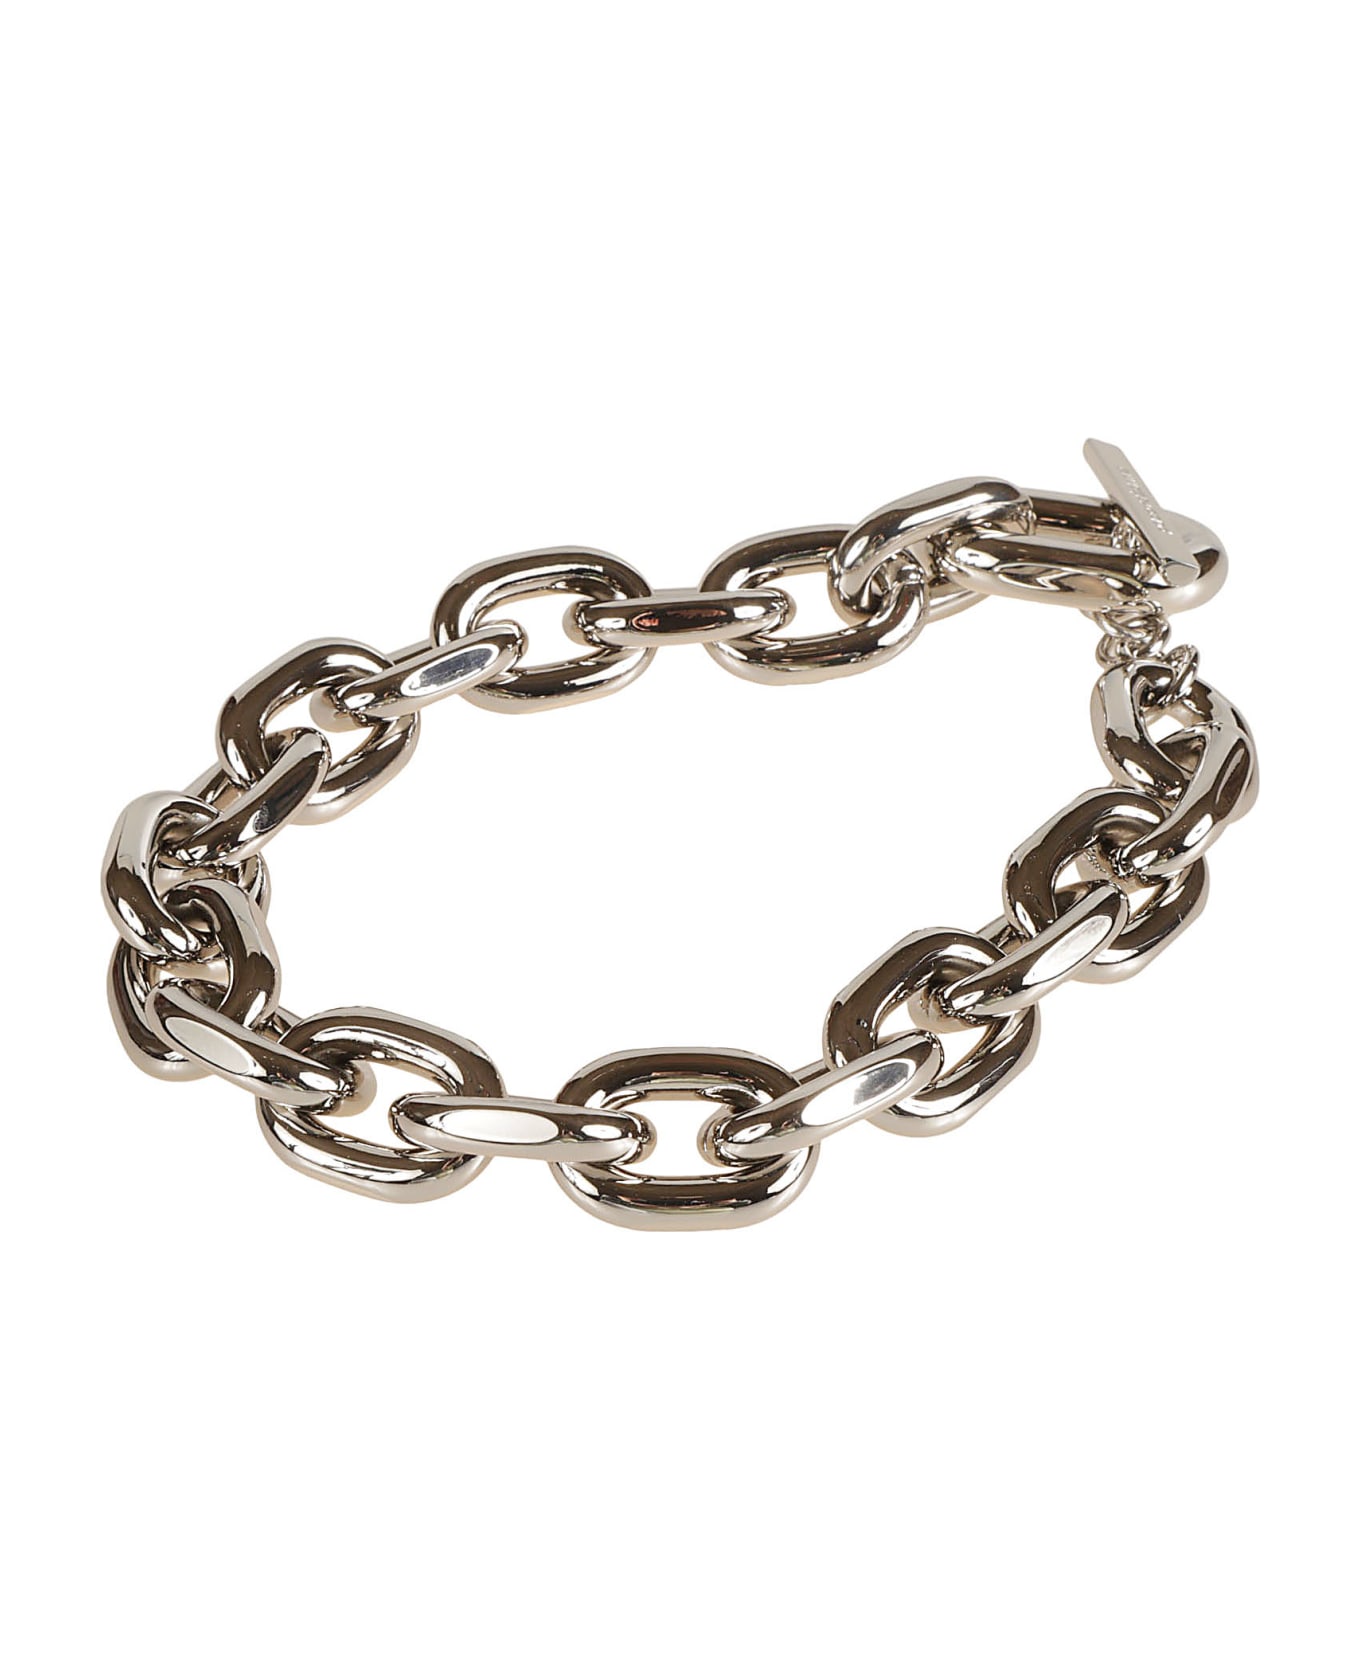 Paco Rabanne Logo Detial Chain Necklace - Silver ネックレス